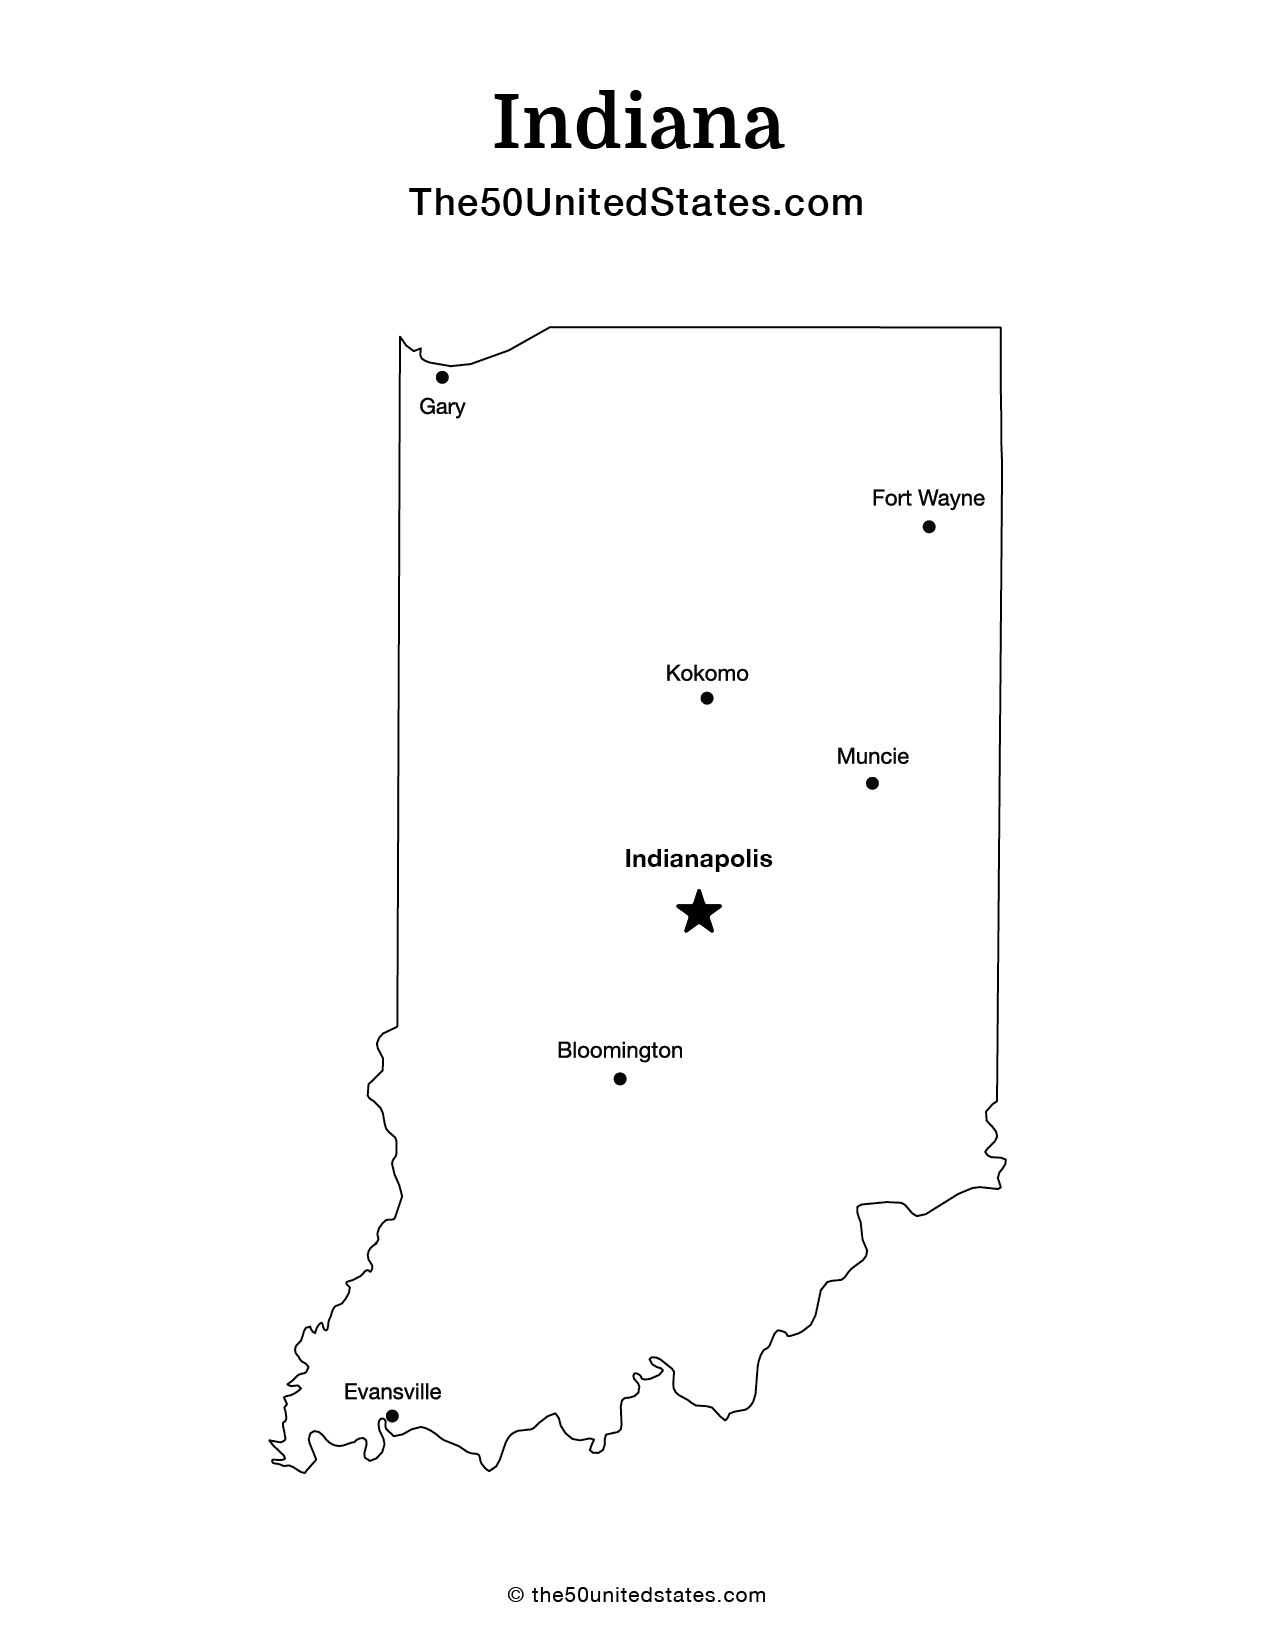 Map of Indiana with Cities (Labeled)